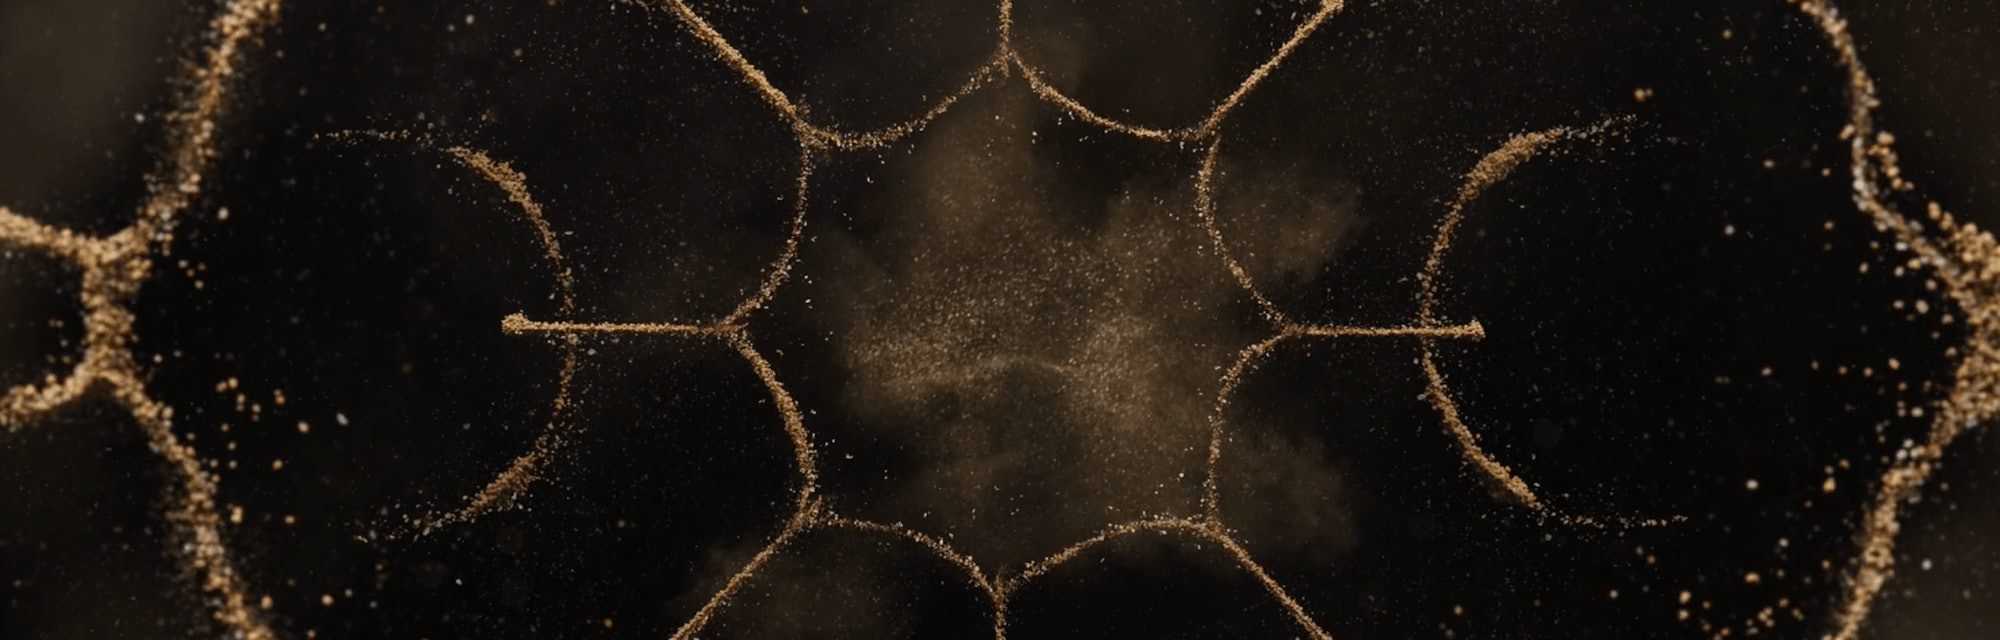 Sand formed into an. interesting pattern on the title credits of "The Rings of Power"